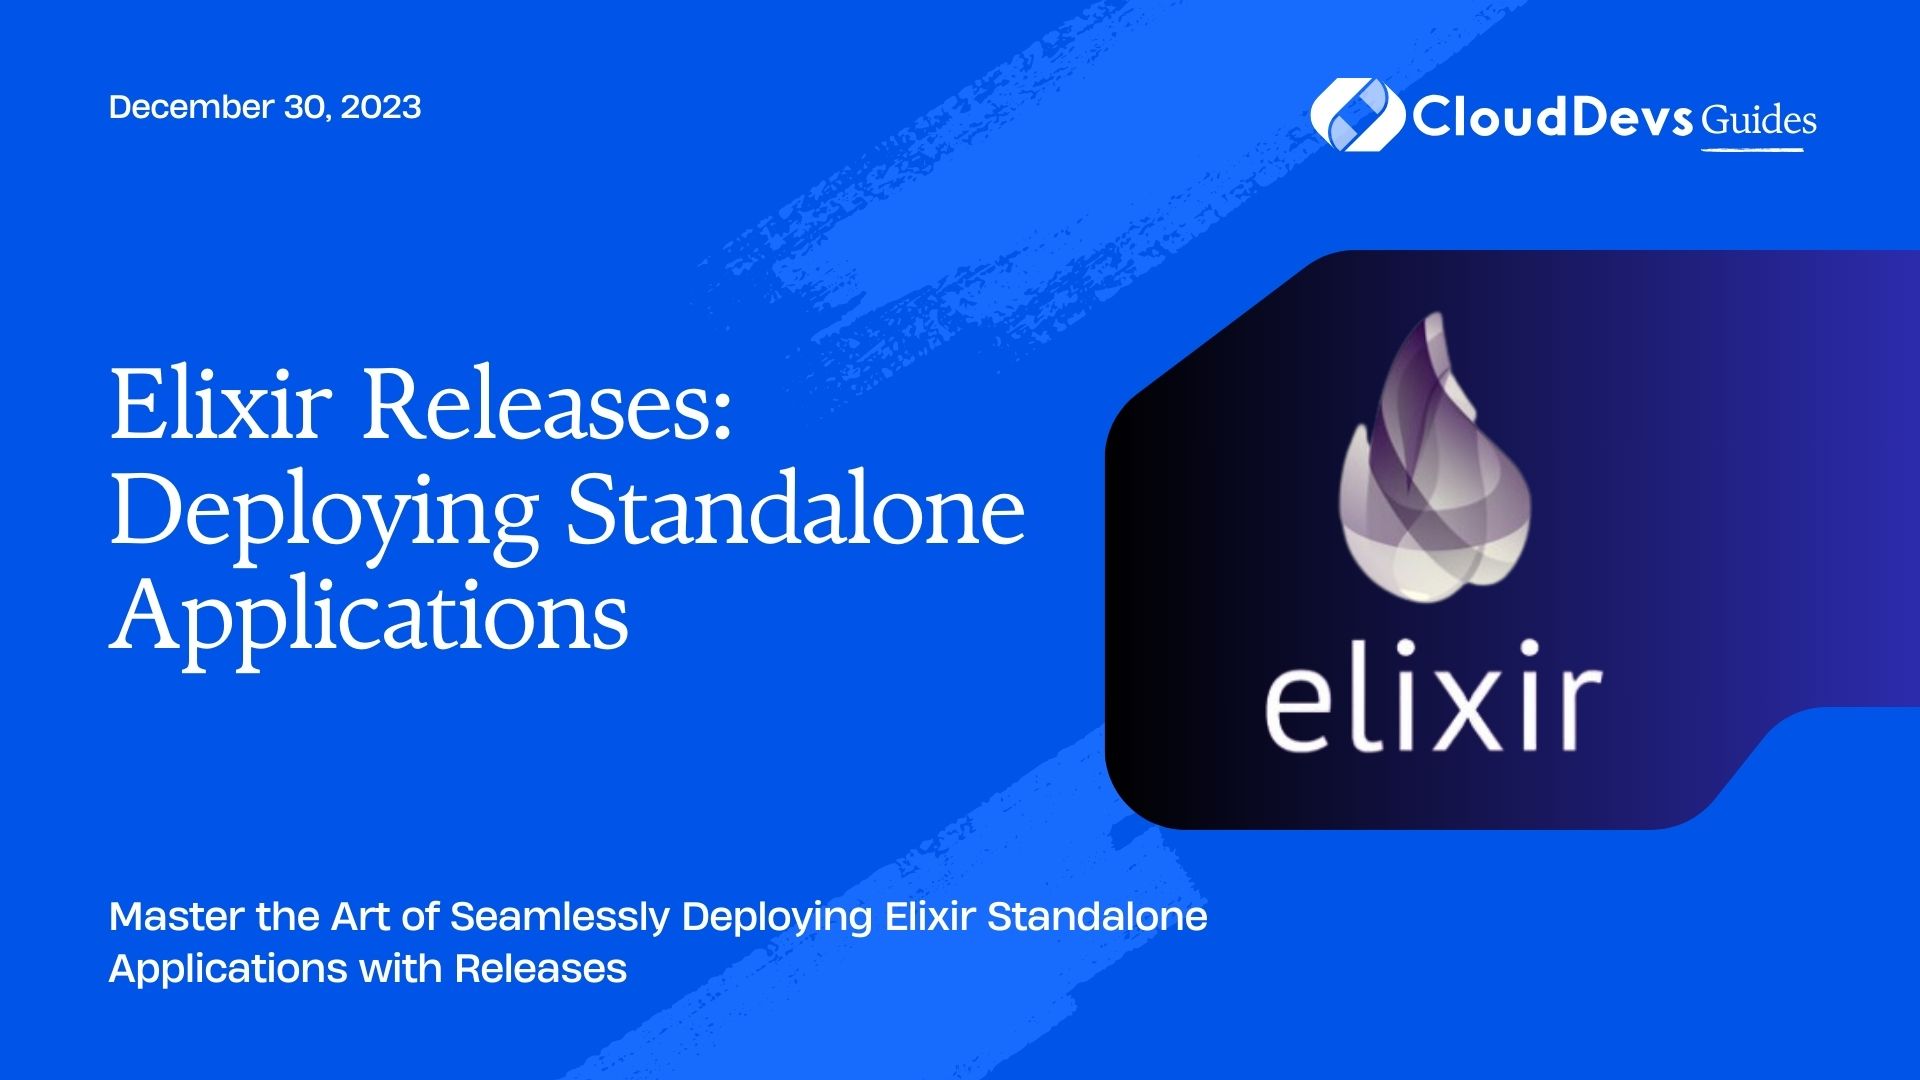 Elixir Releases: Deploying Standalone Applications